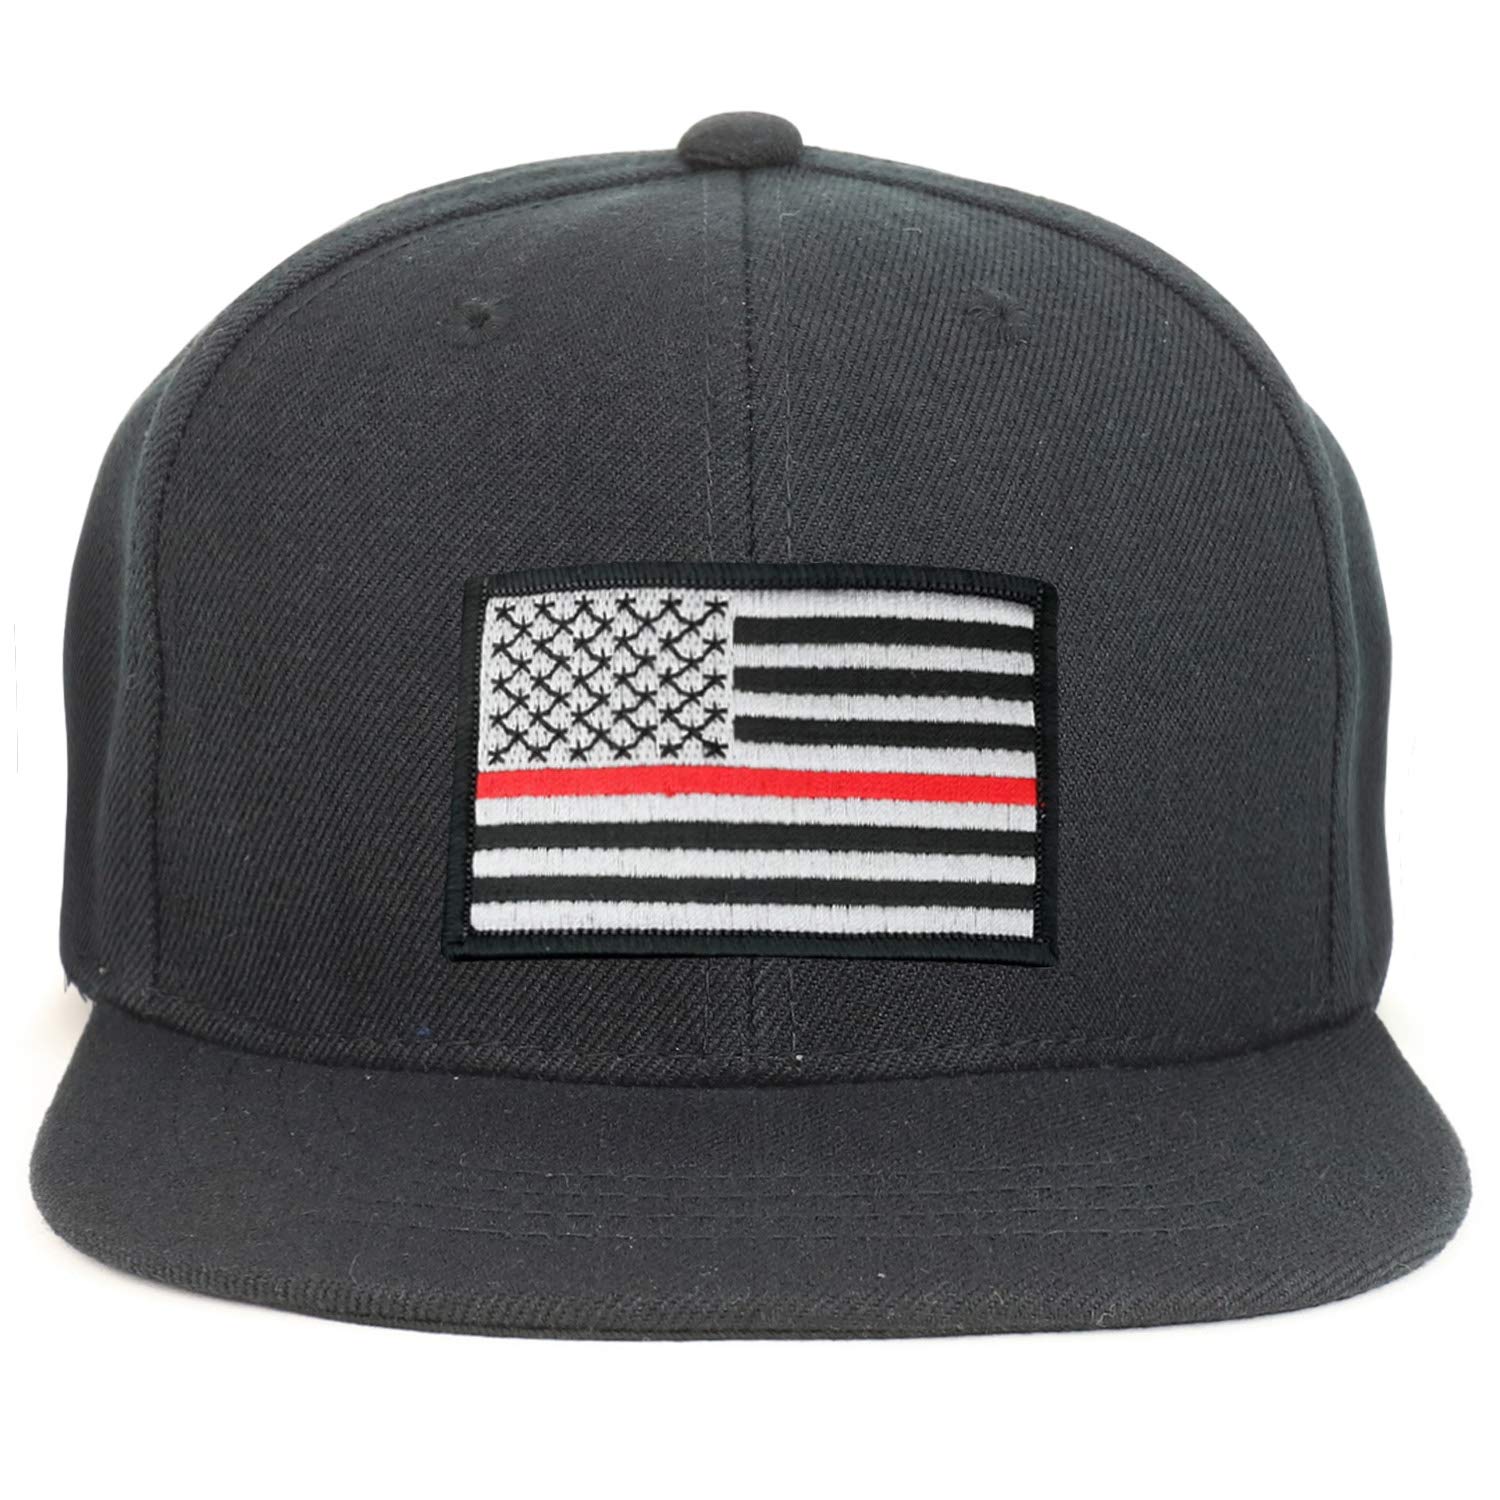 Armycrew Youth Kid Size Thin Red Line 2 American Flag Patch Flat Bill Snapback Baseball Cap